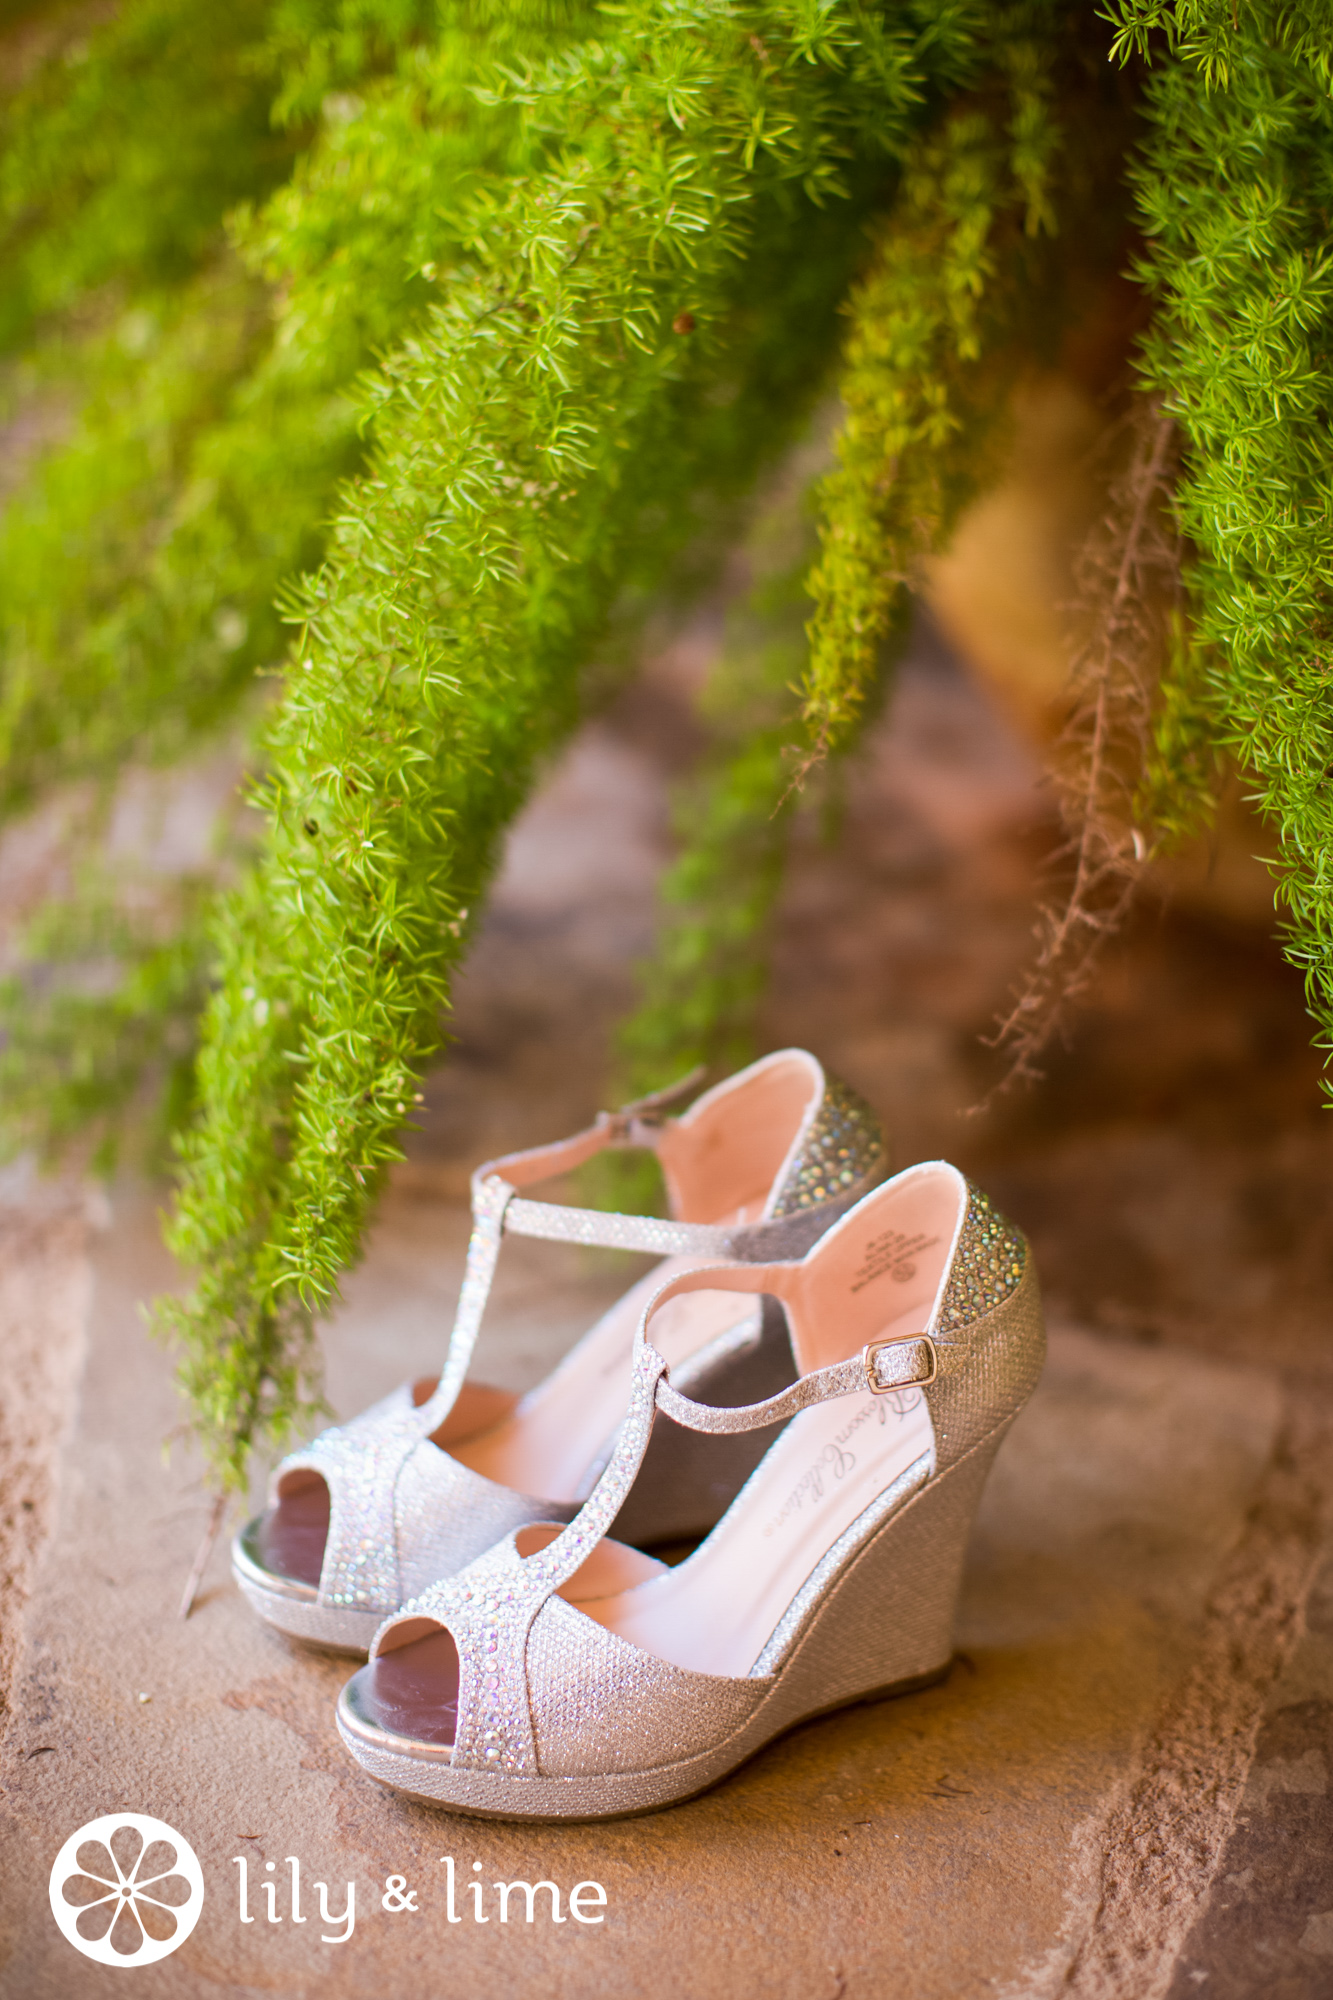 cream colored shoes for wedding